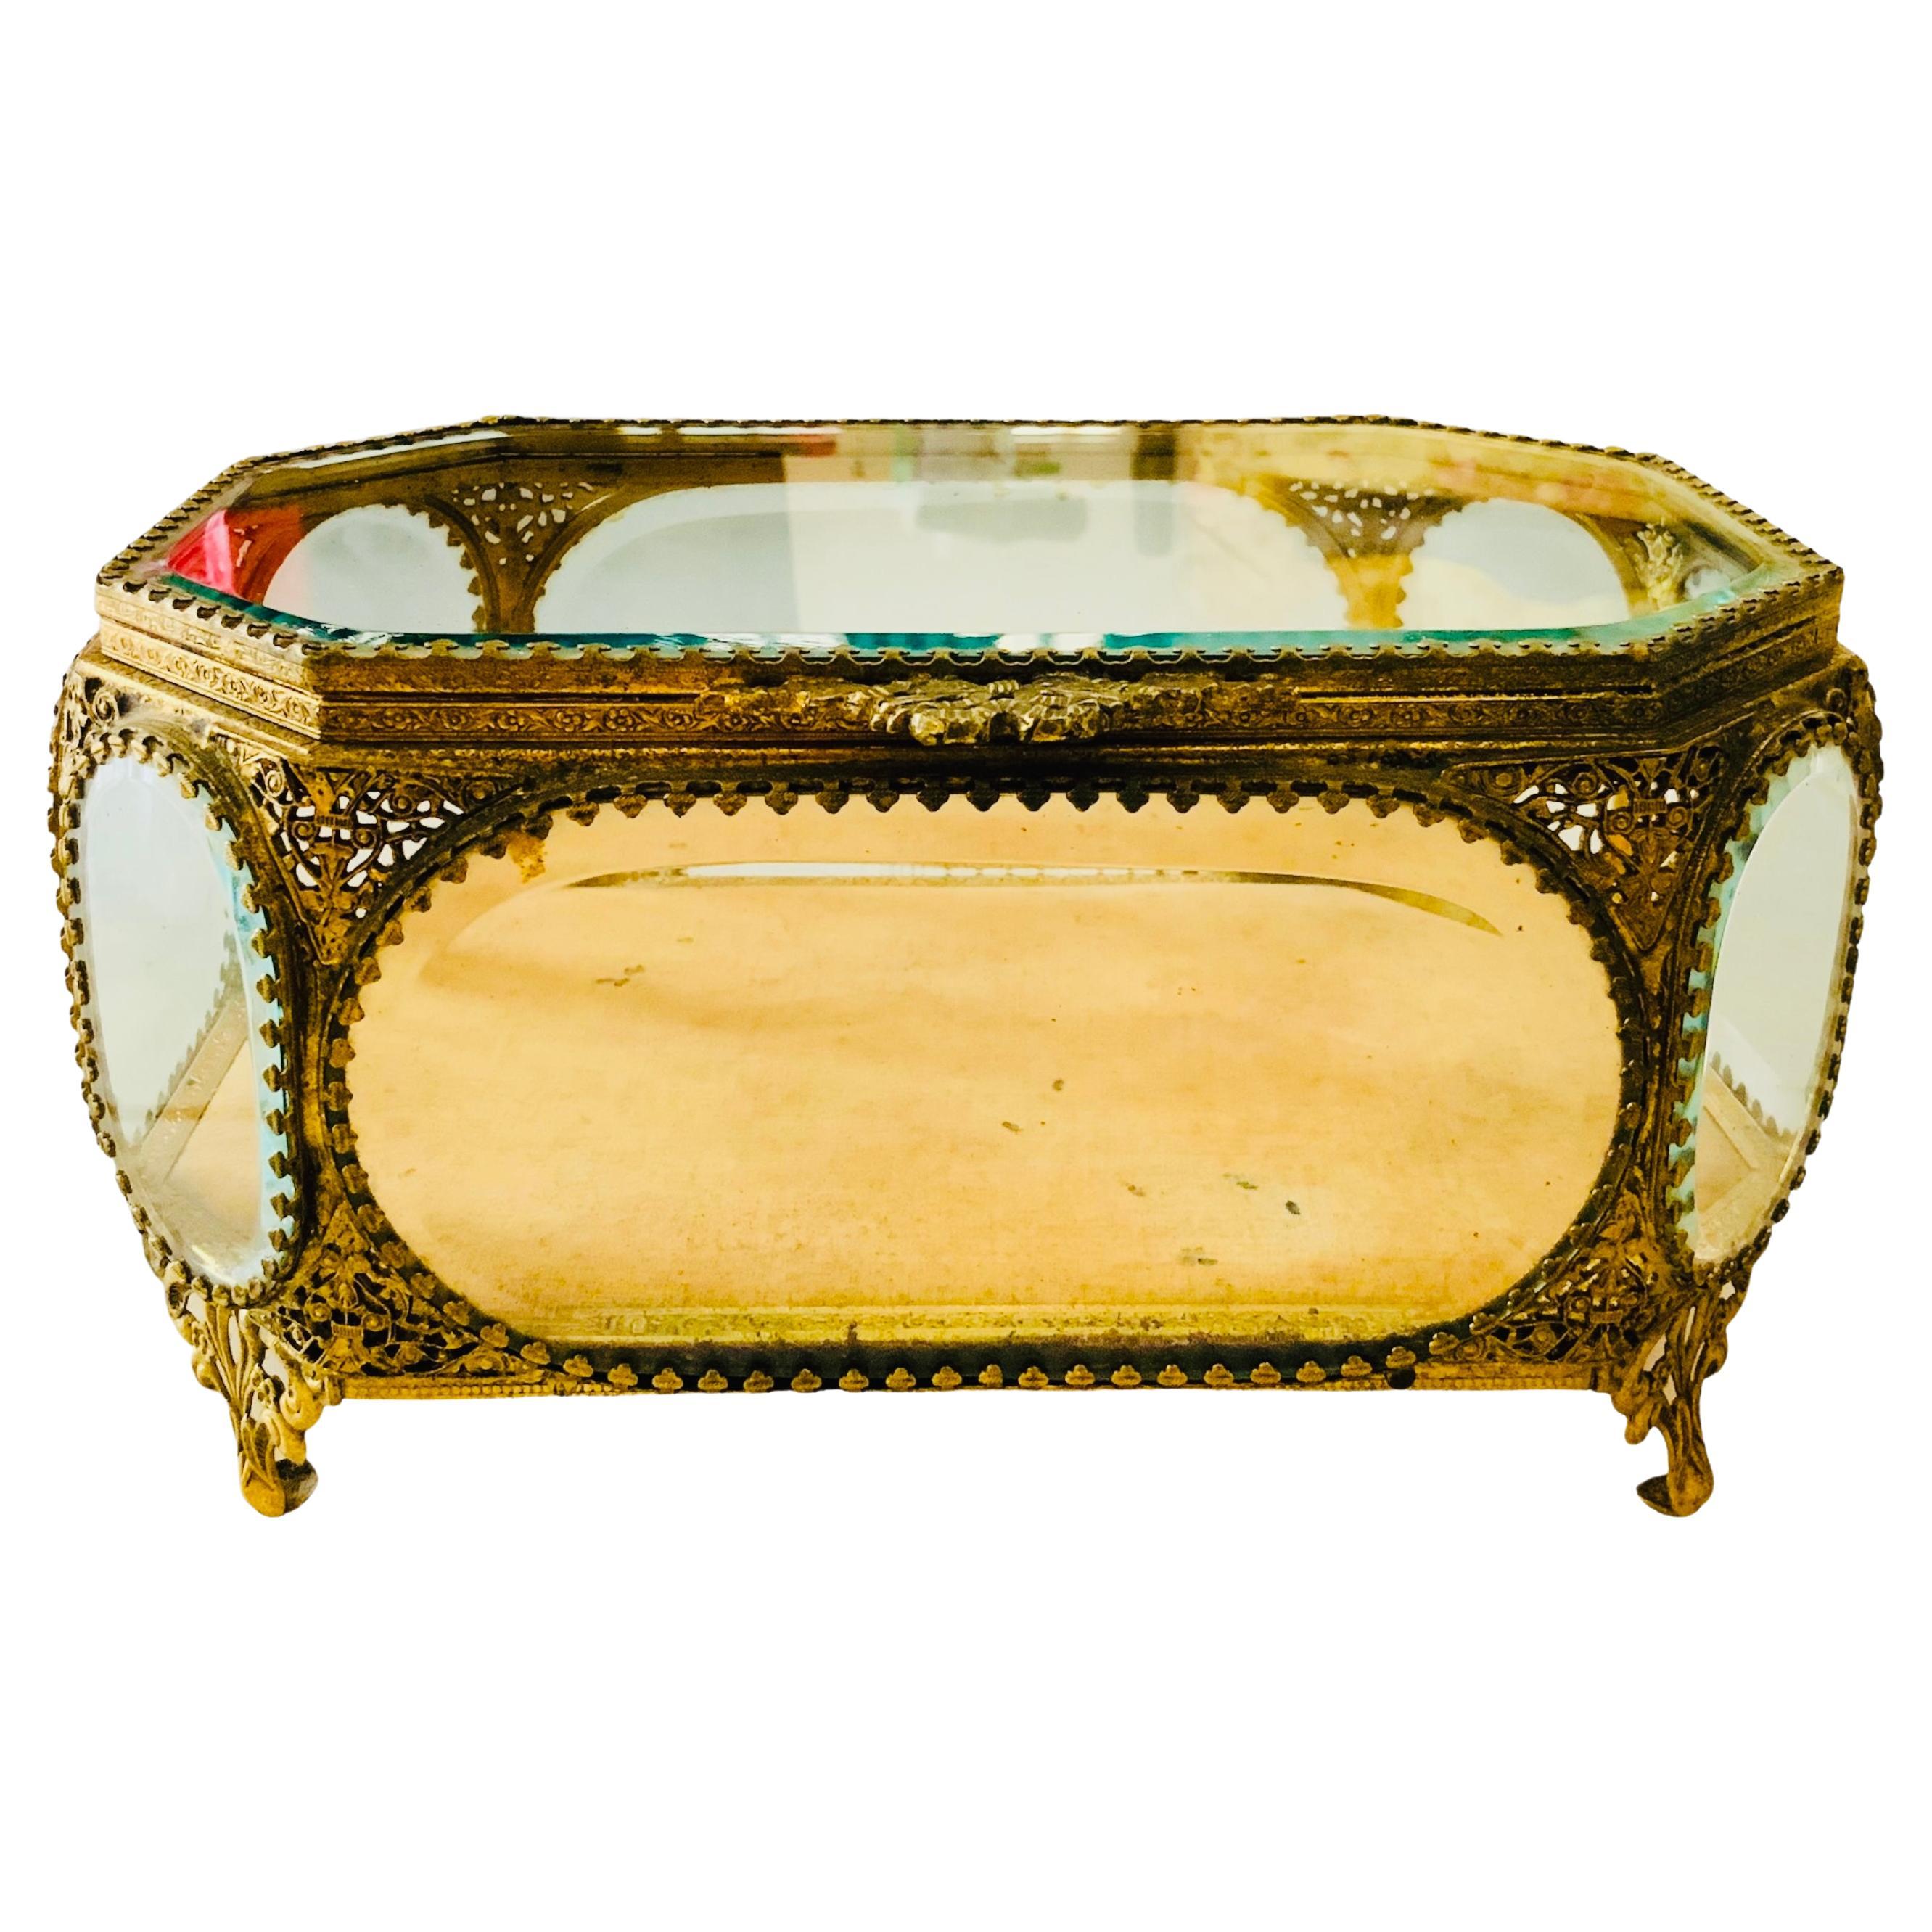 Victorian Style Gilt Metal Octagonal Shaped Casket/Jewelry Box For Sale